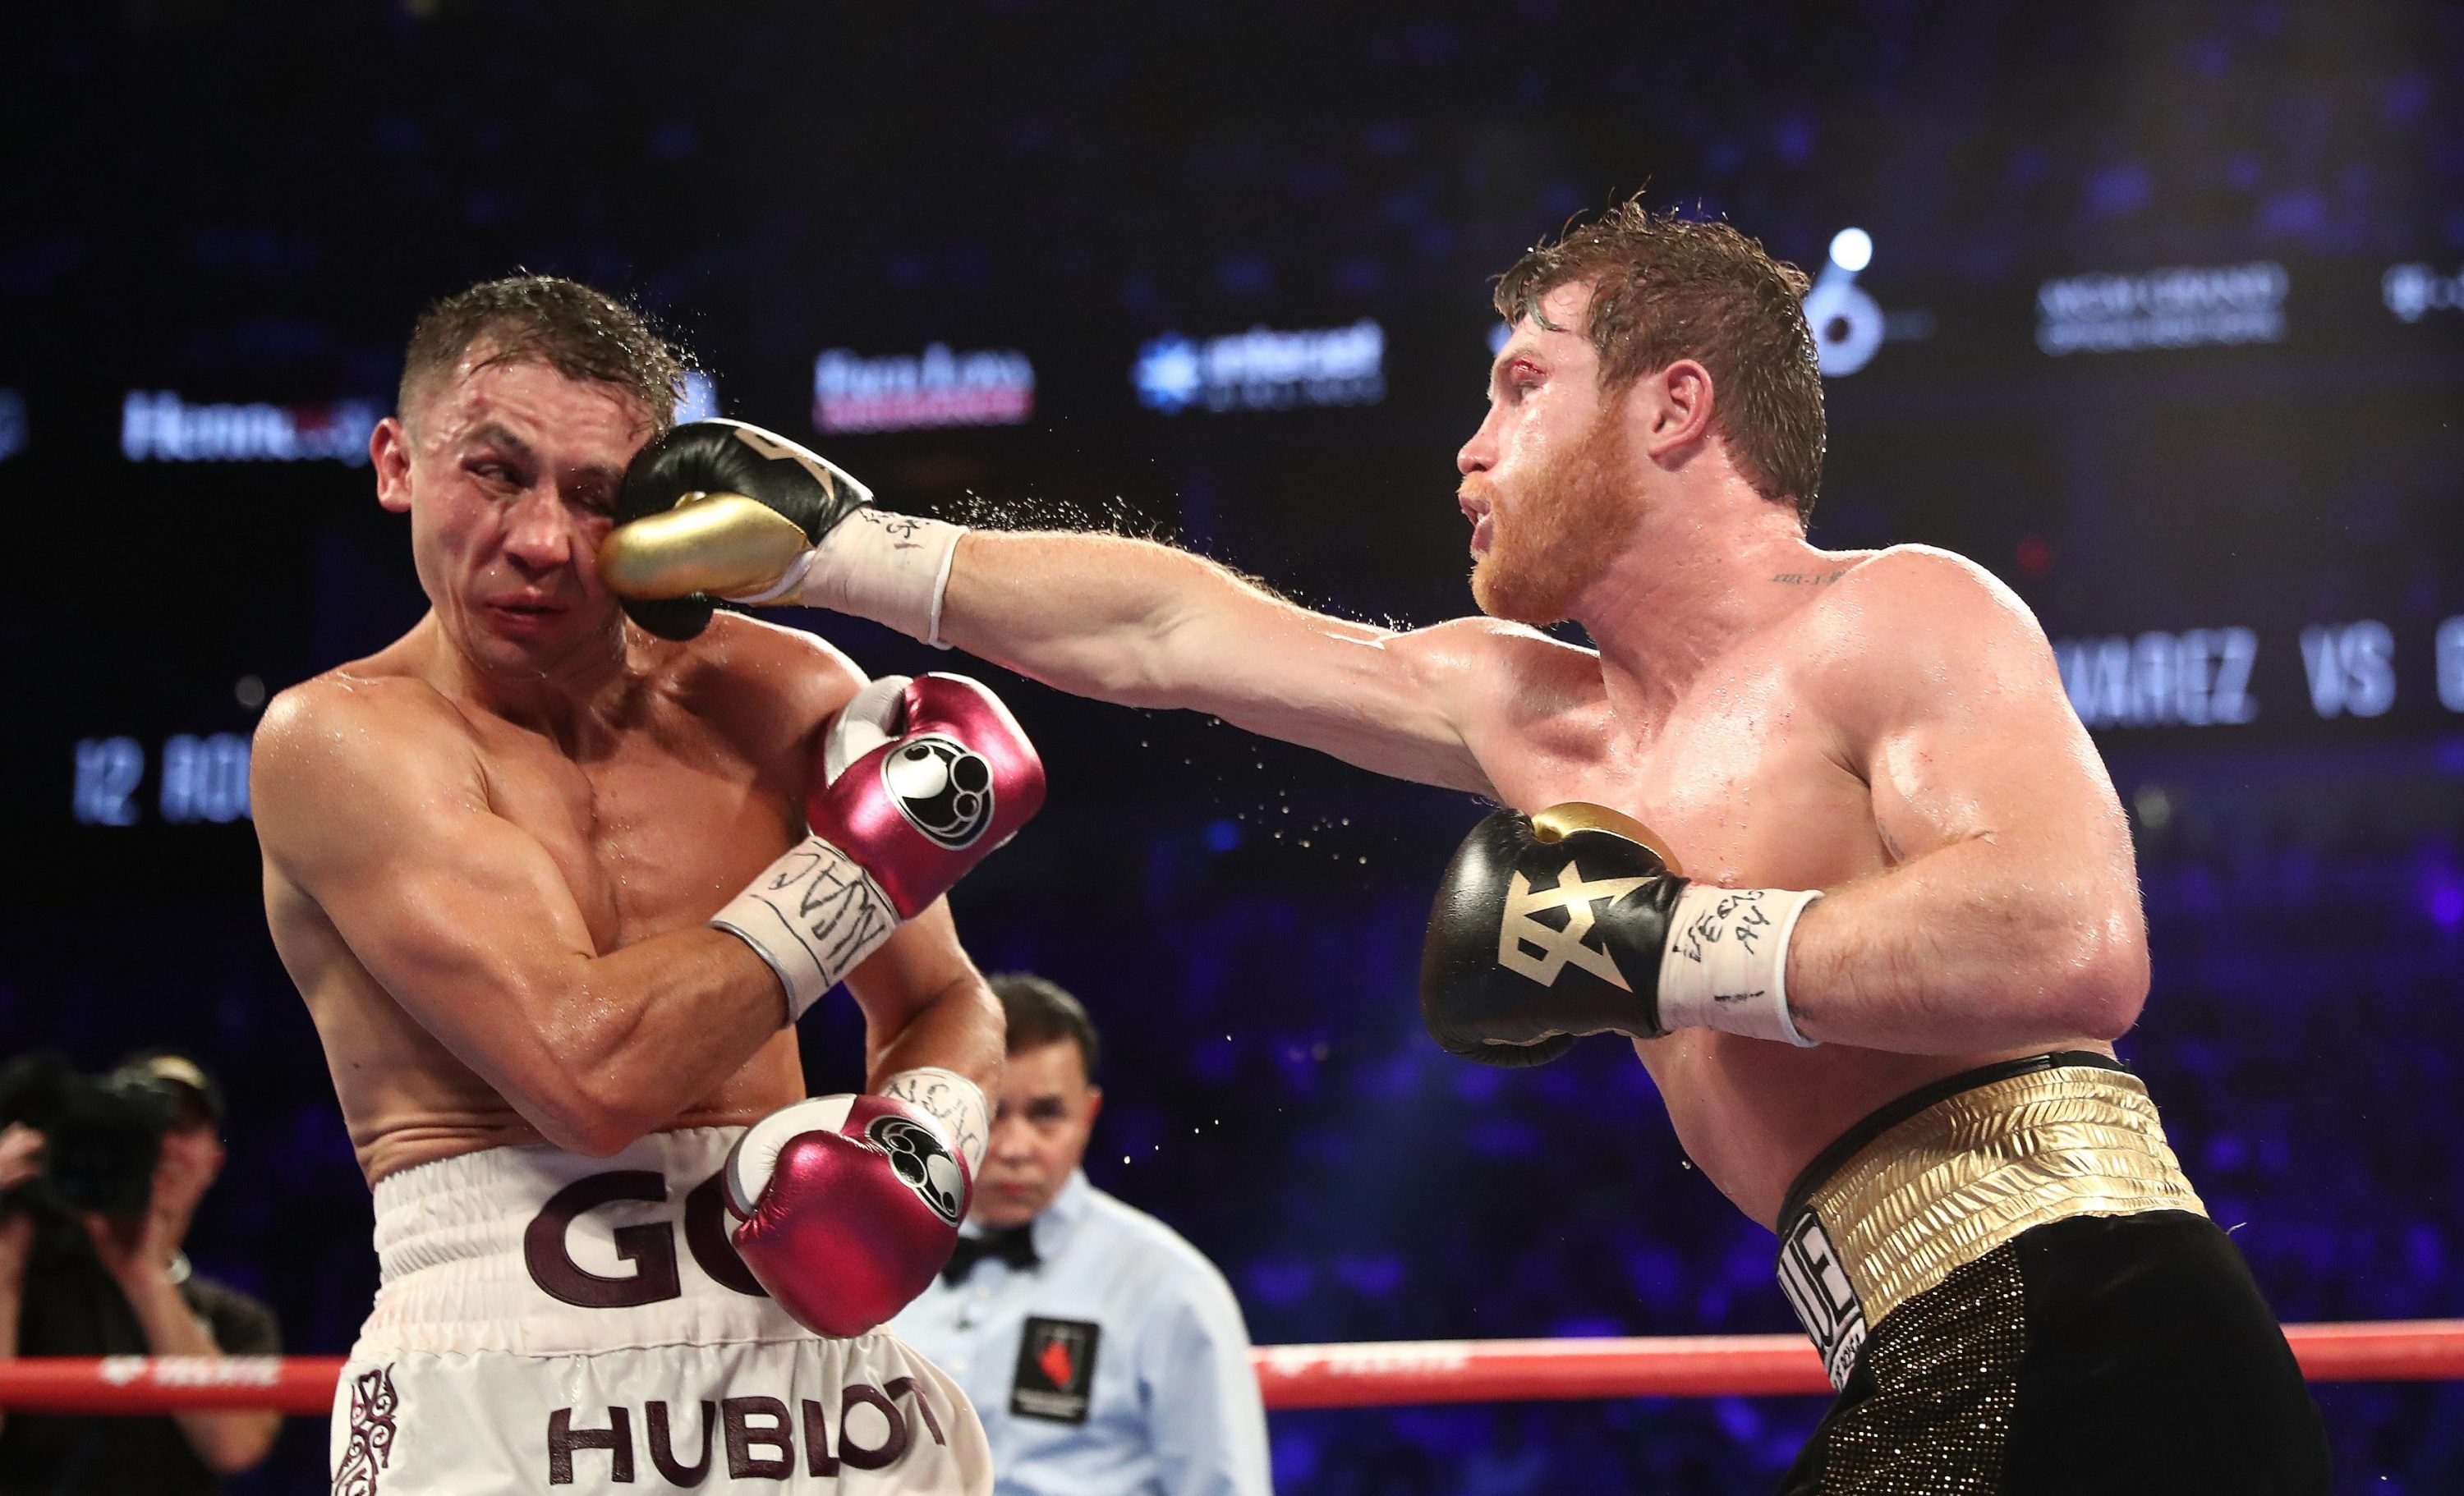 During arguably boxing's biggest fight of 2018, Canelo Alvarez punches Gennady "GGG" Golovkin during their
WBC/WBA middleweight title fight at T-Mobile Arena on September 15, 2018 in Las Vegas, Nevada. (Al Bello/Getty Images)